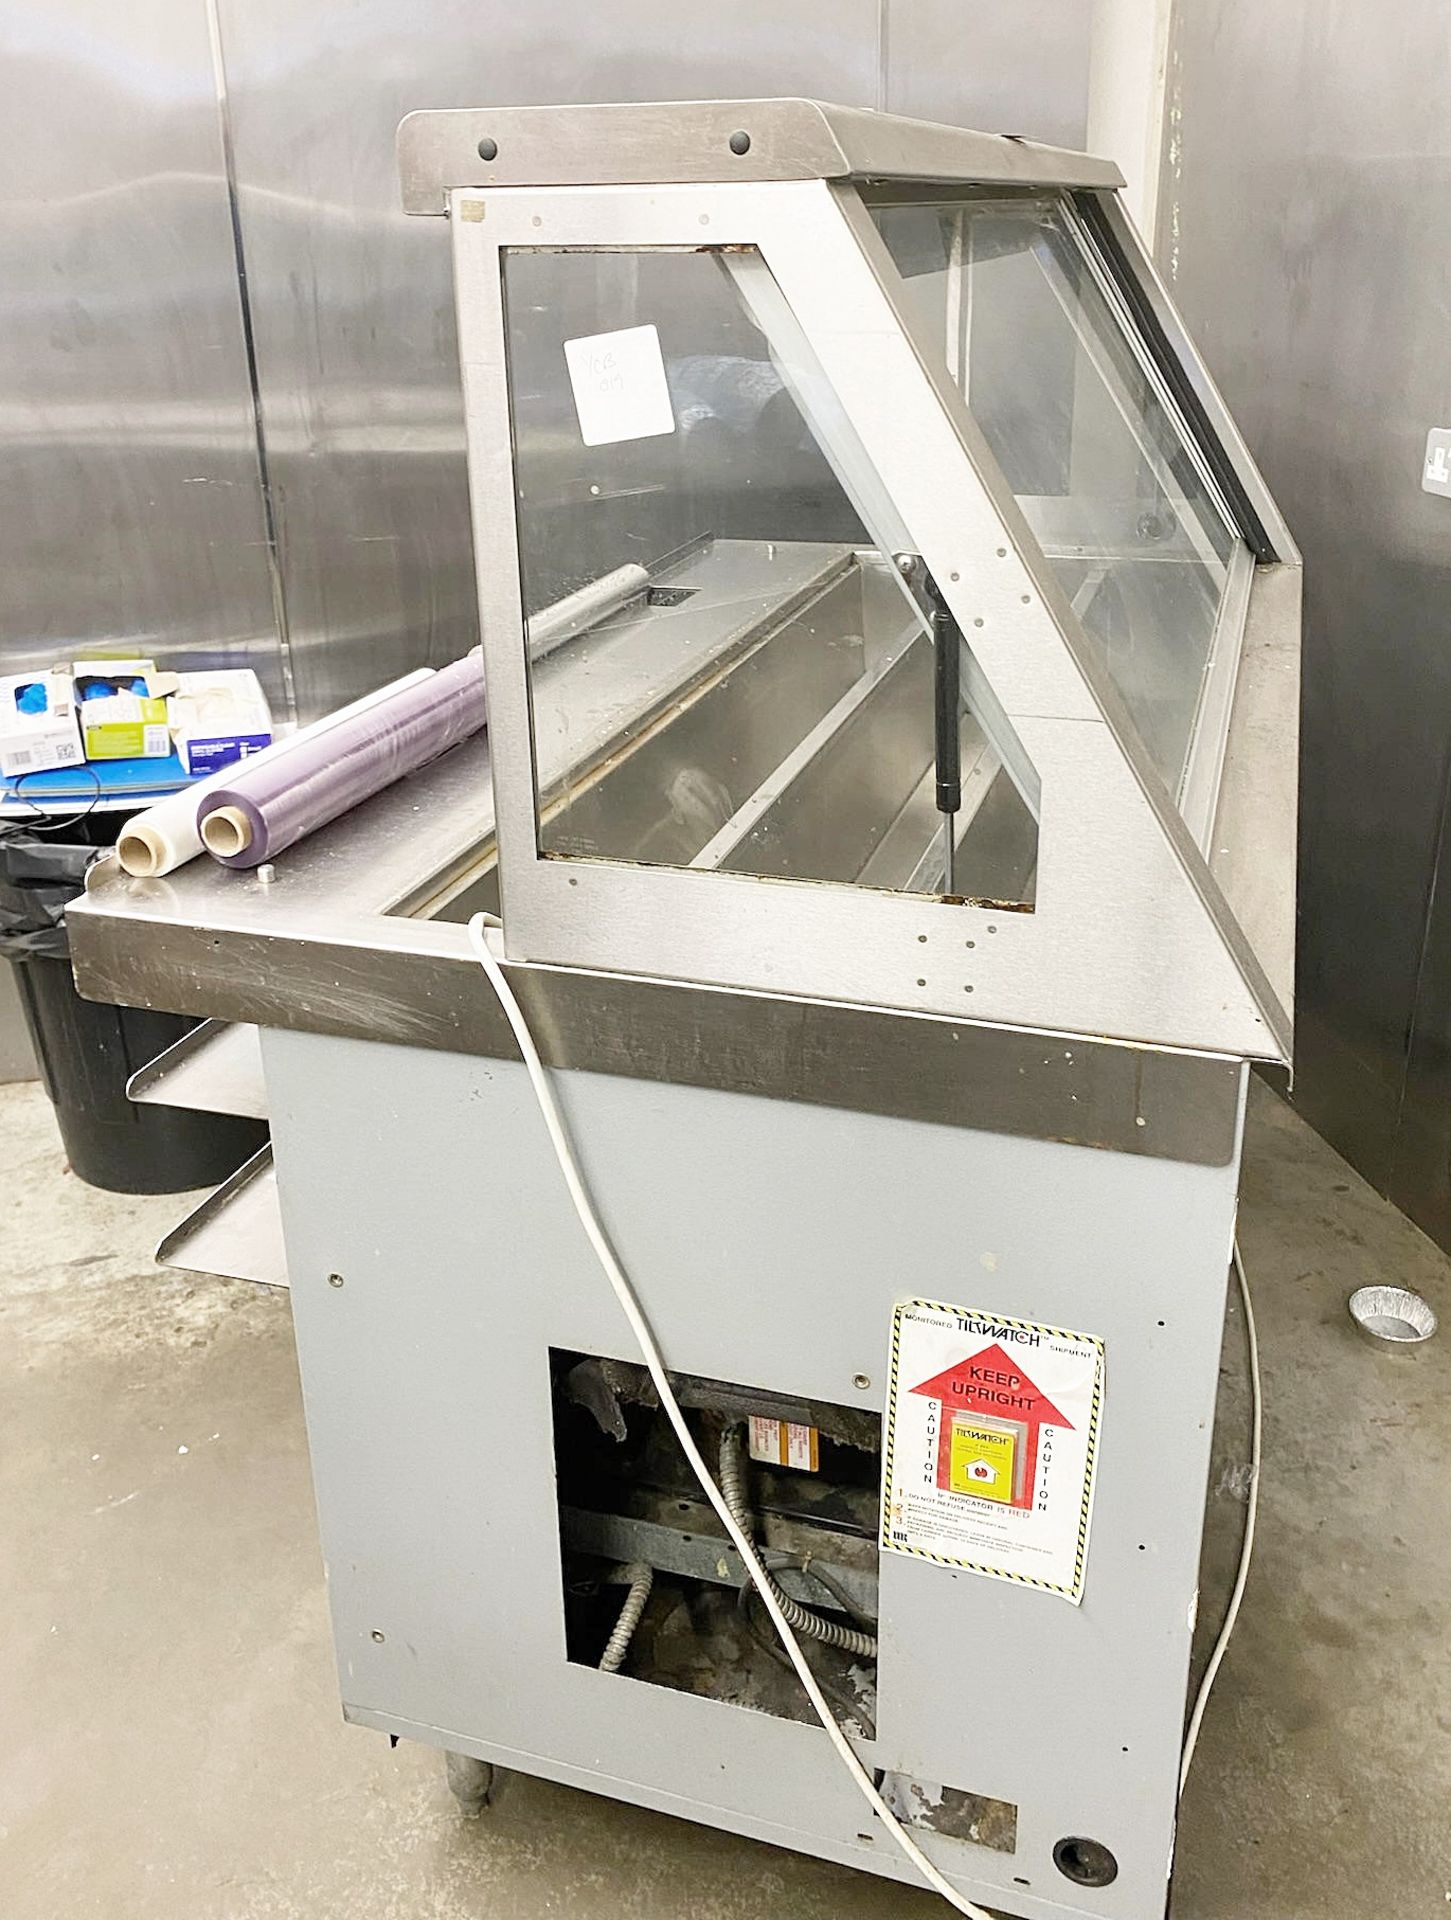 1 x Duke SWD600-60FL M Refrigerated Sandwich Prep Line With Slanted Glass Screen - As Used in Subway - Image 2 of 10